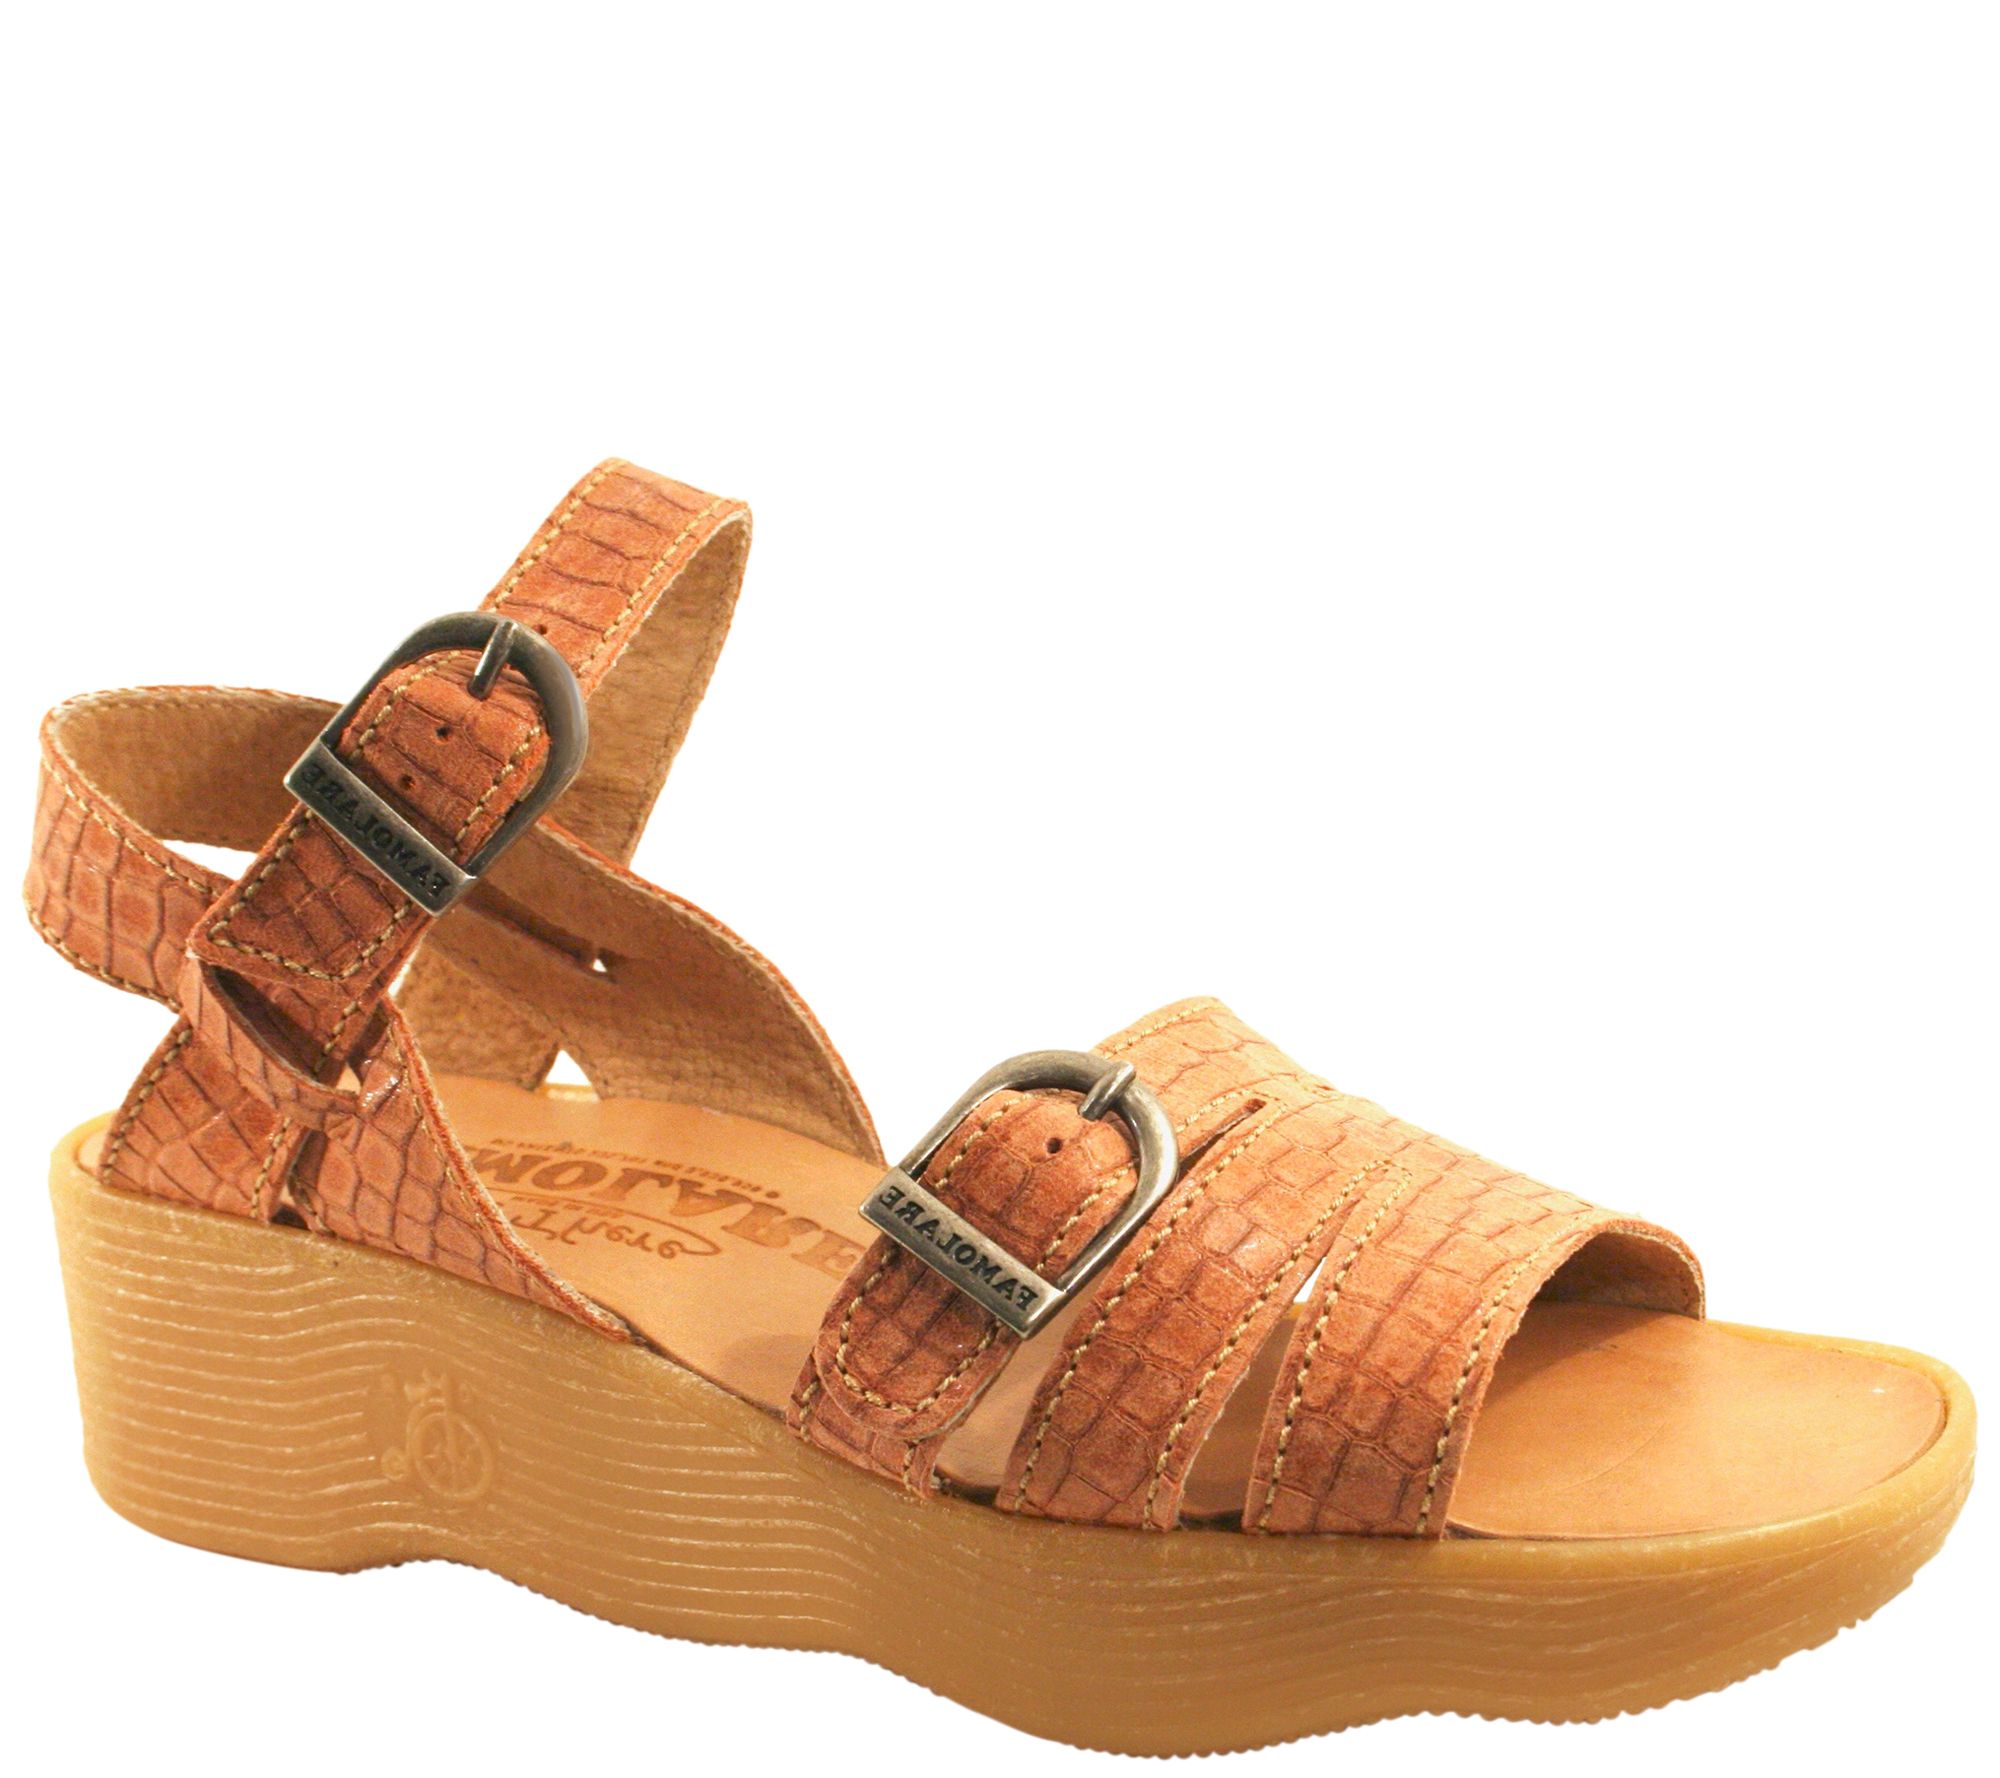 Famolare Get There Leather Wedge Sandal - Honeybuckle - QVC.com